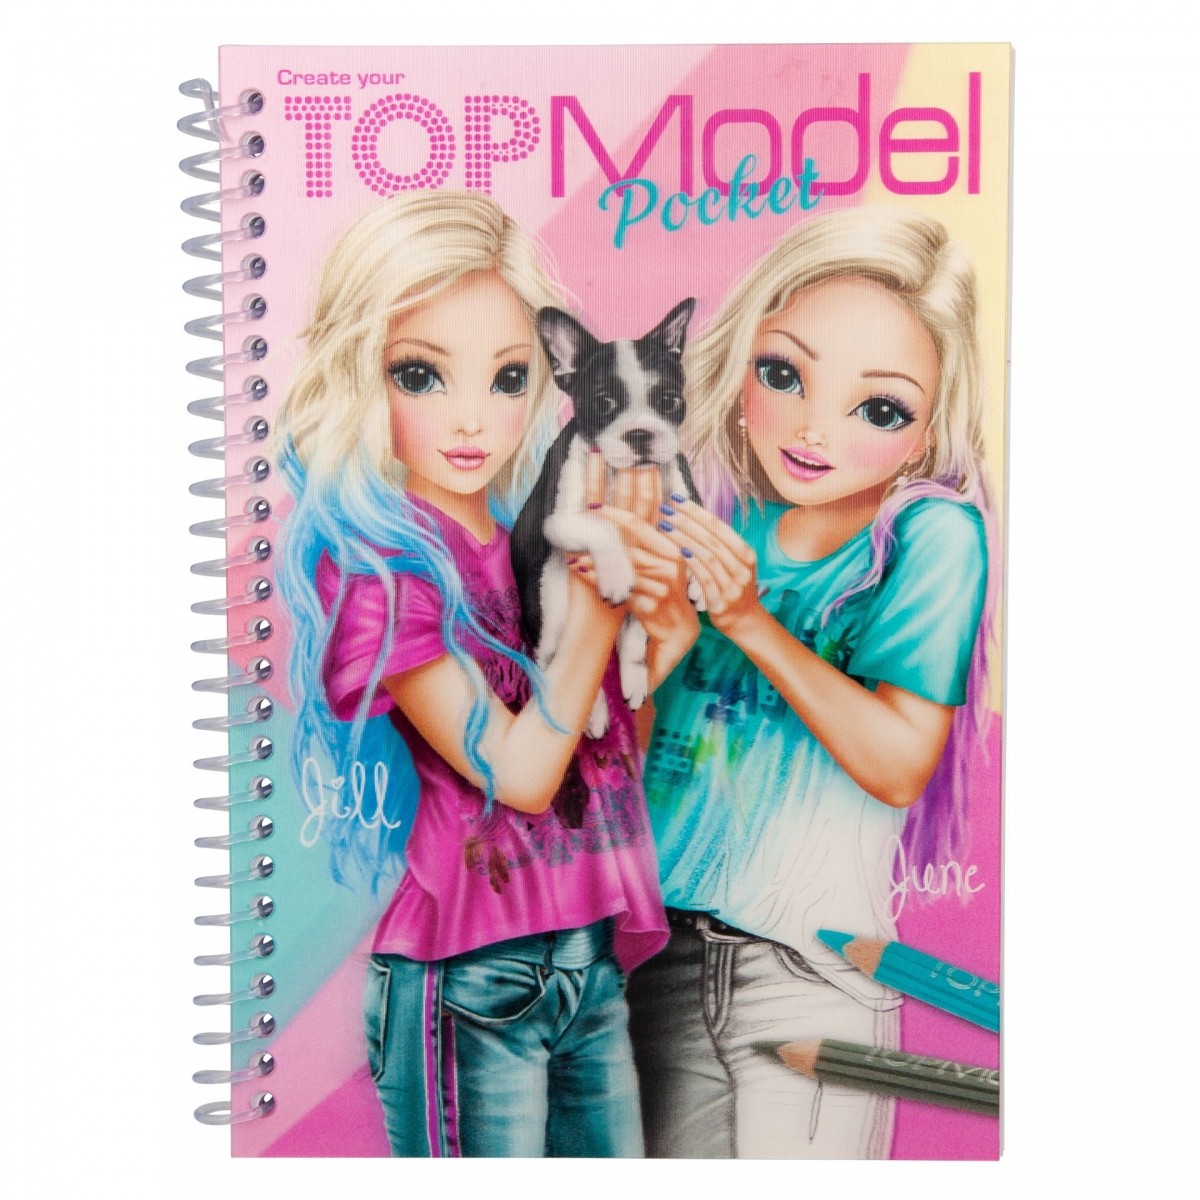 Top Model Pocket Colouring Book with Jill and June Cover - Bright Star Toys